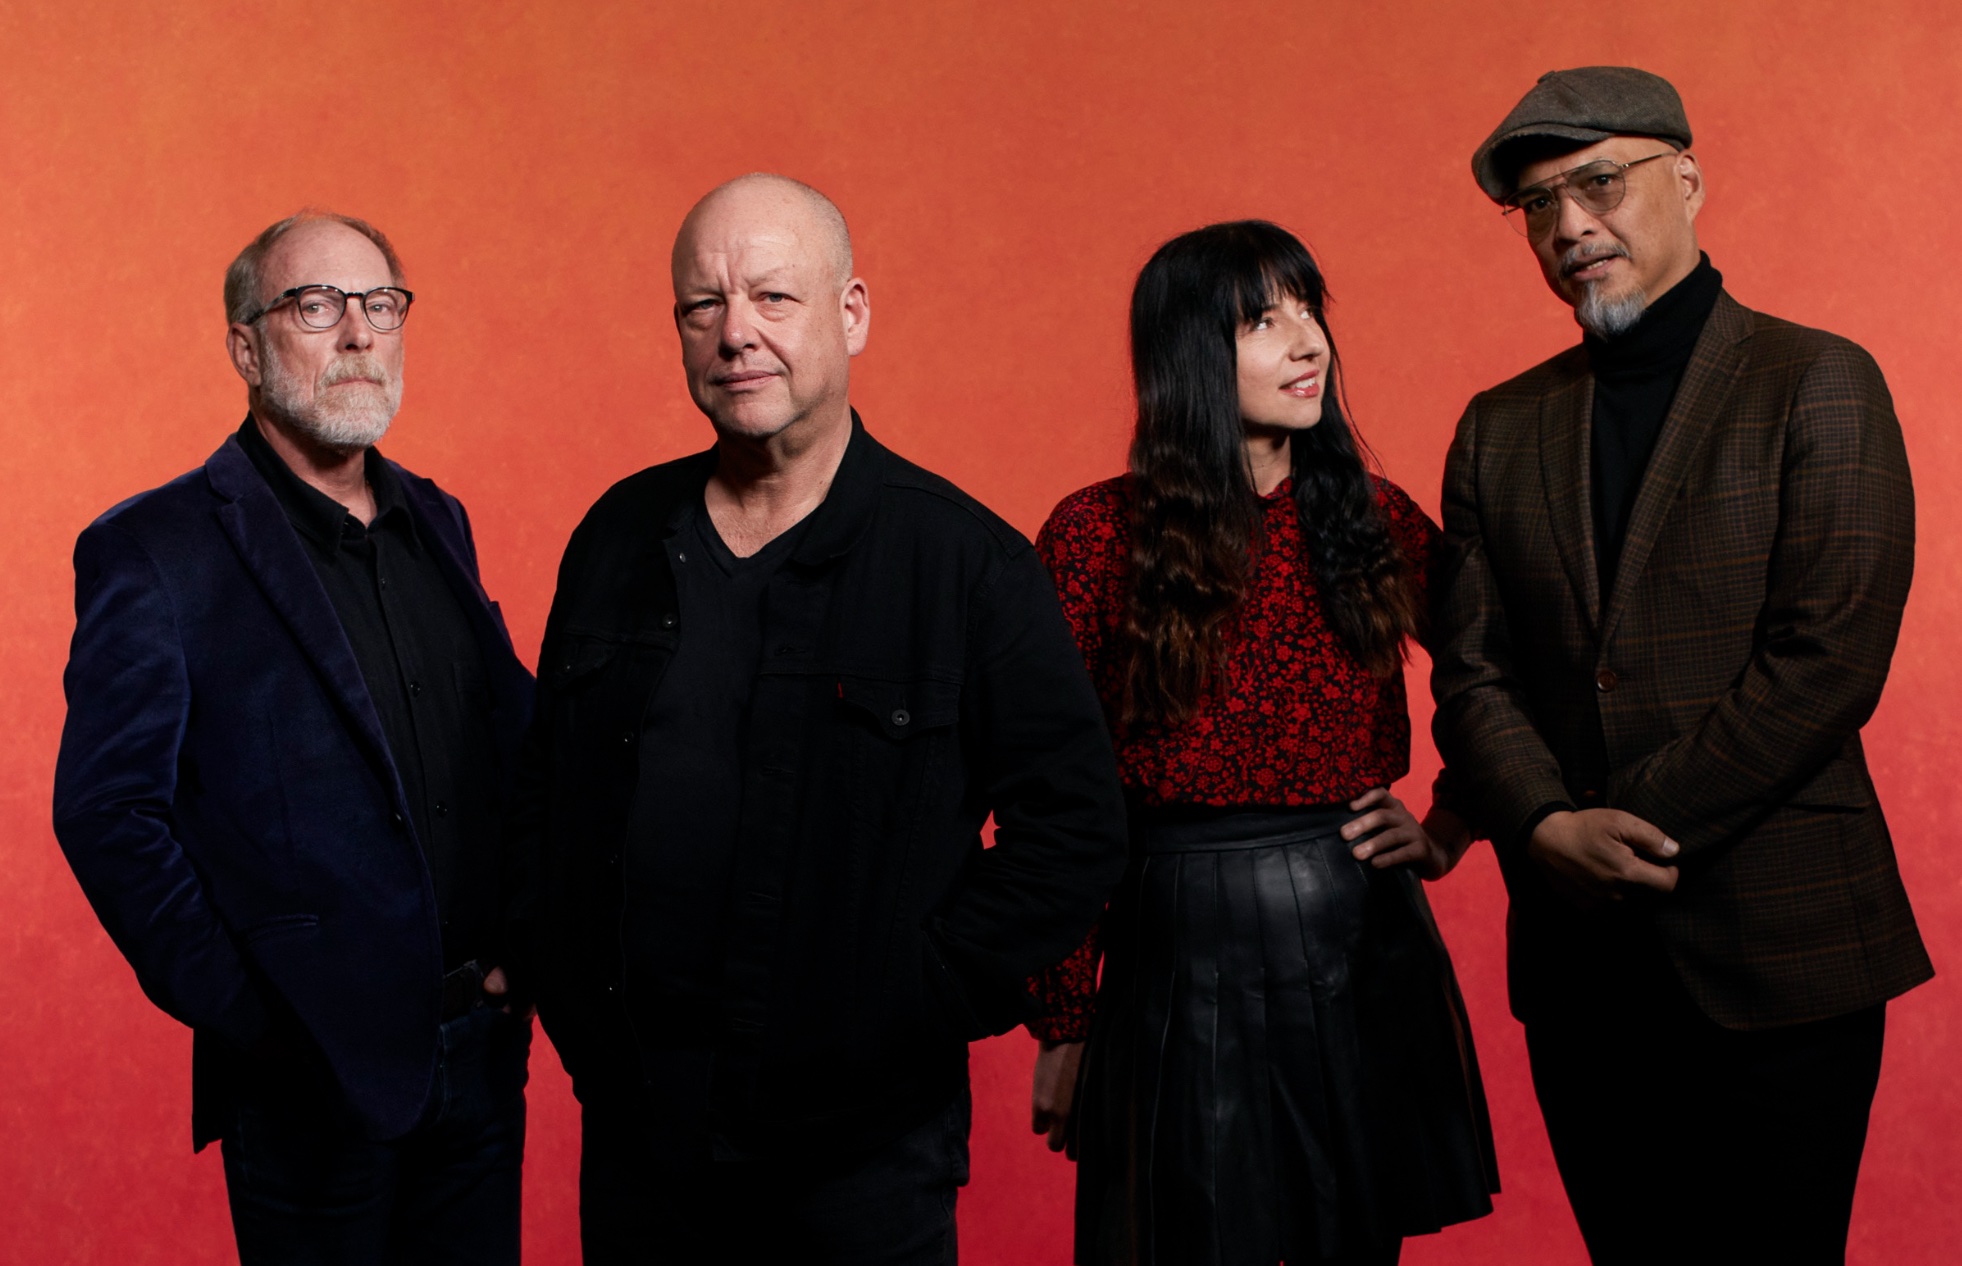 PIXIES ANNOUNCE LEG THREE OF THEIR 2023 NORTH AMERICAN TOUR WITH STOP HERE IN CHICAGO